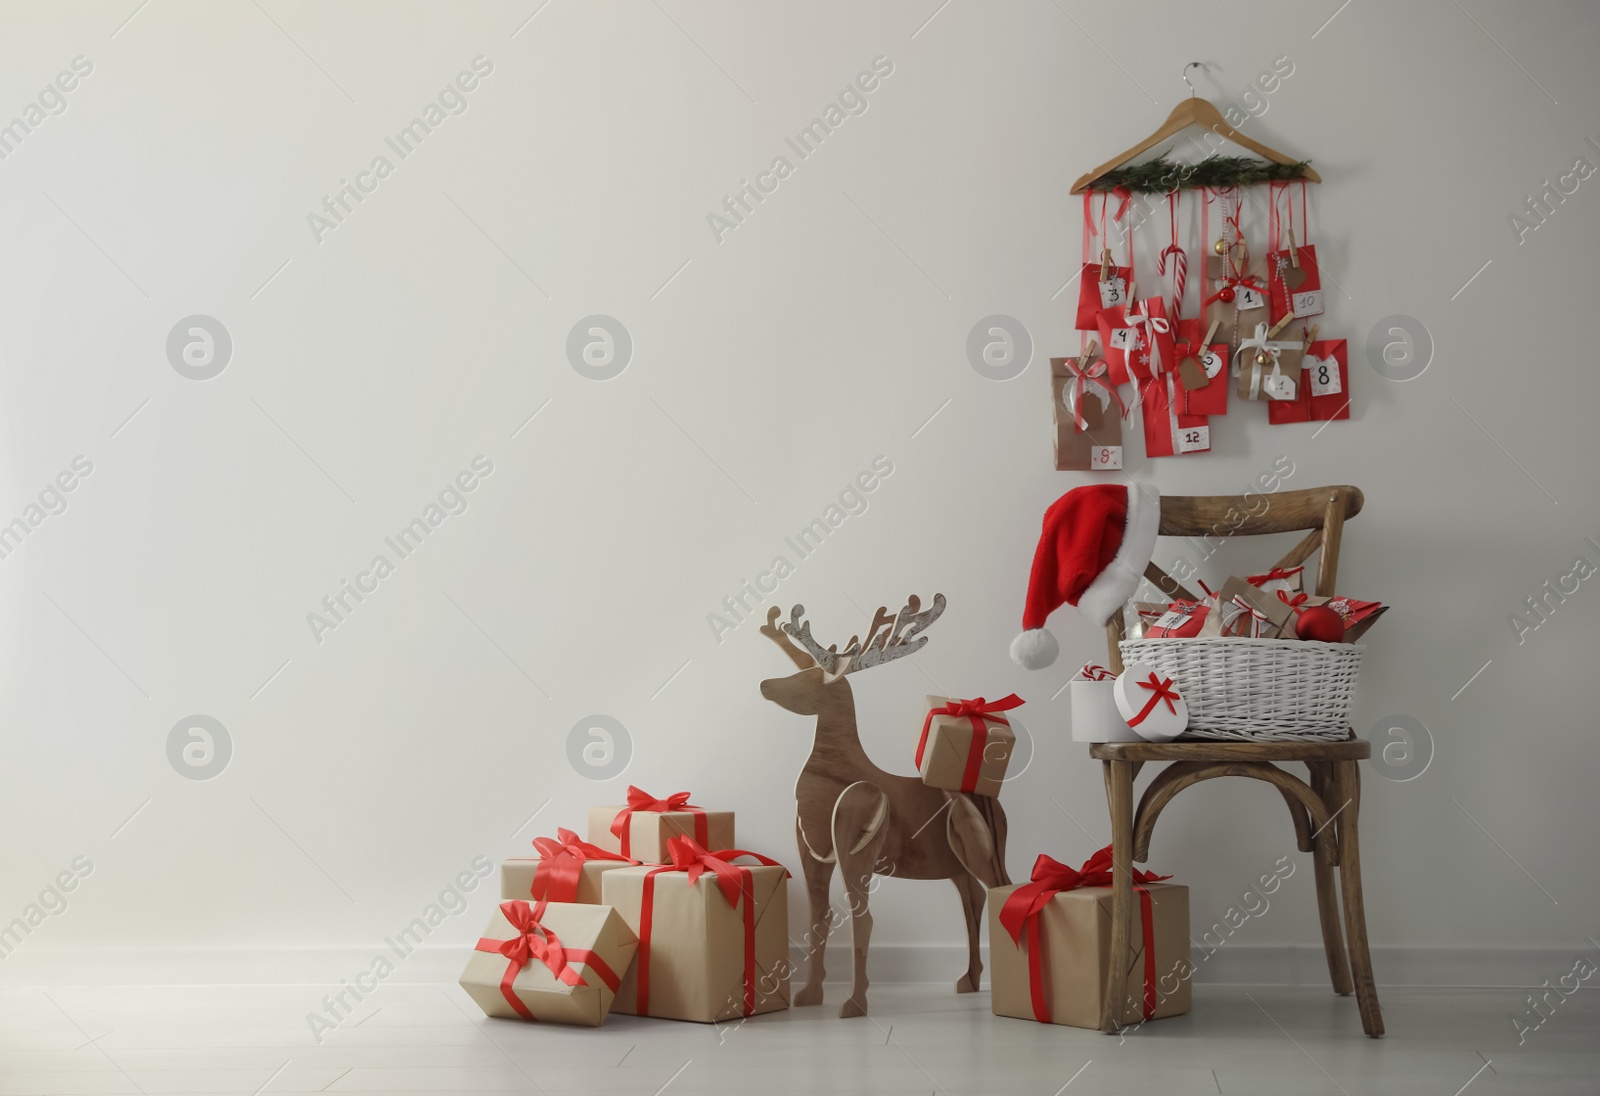 Photo of Advent calendar, Christmas gifts and decor near white wall indoors, space for text